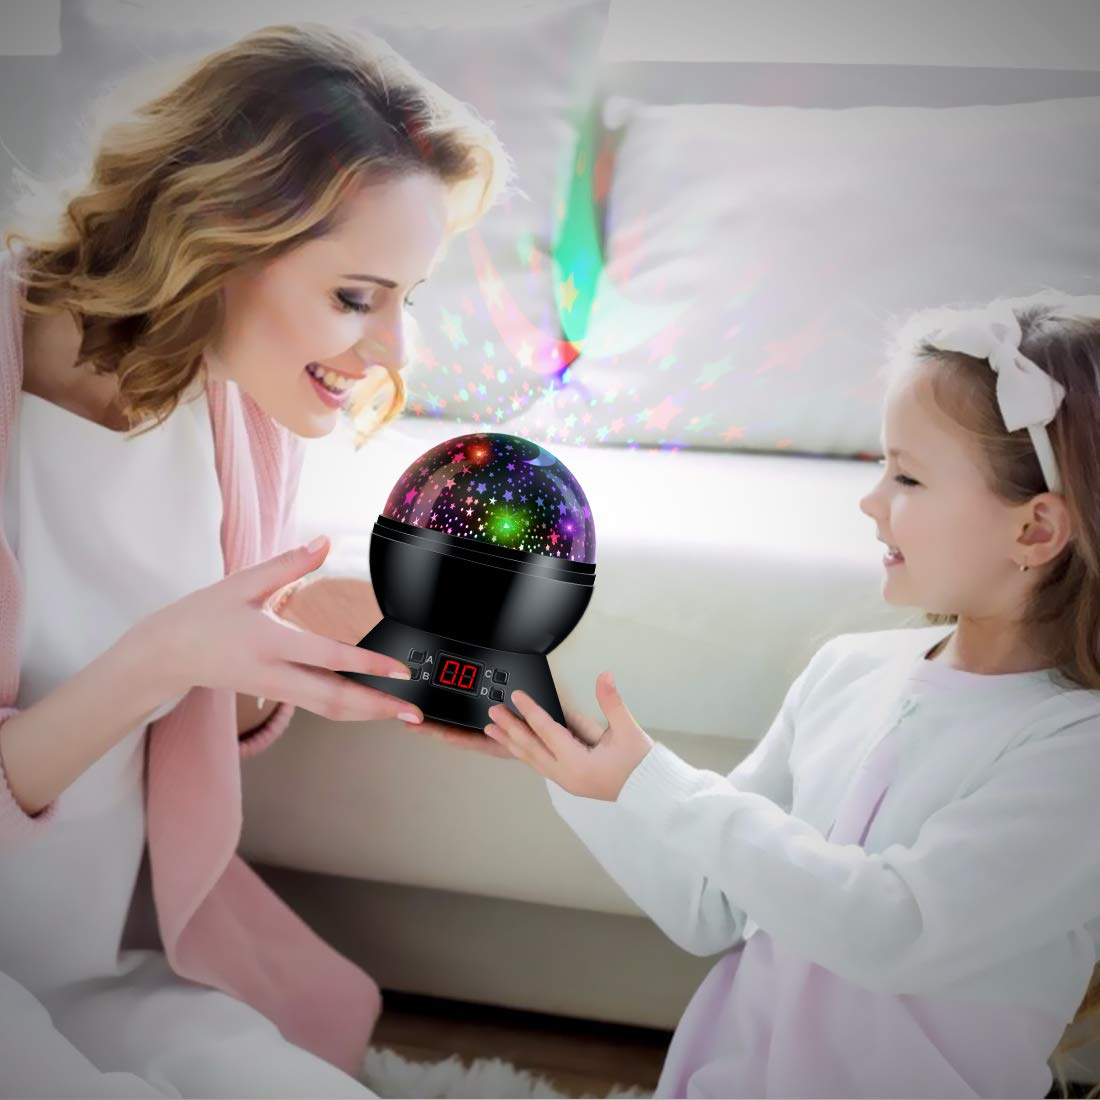 MOKOQI Star Projector Night Lights for Kids With Timer, Gifts for 1 - 14 Year Old Girl and Boy, Room Lights for Kids Glow in The Dark Stars and Moon can Make Child Sleep Peacefully and Best Gift-Black